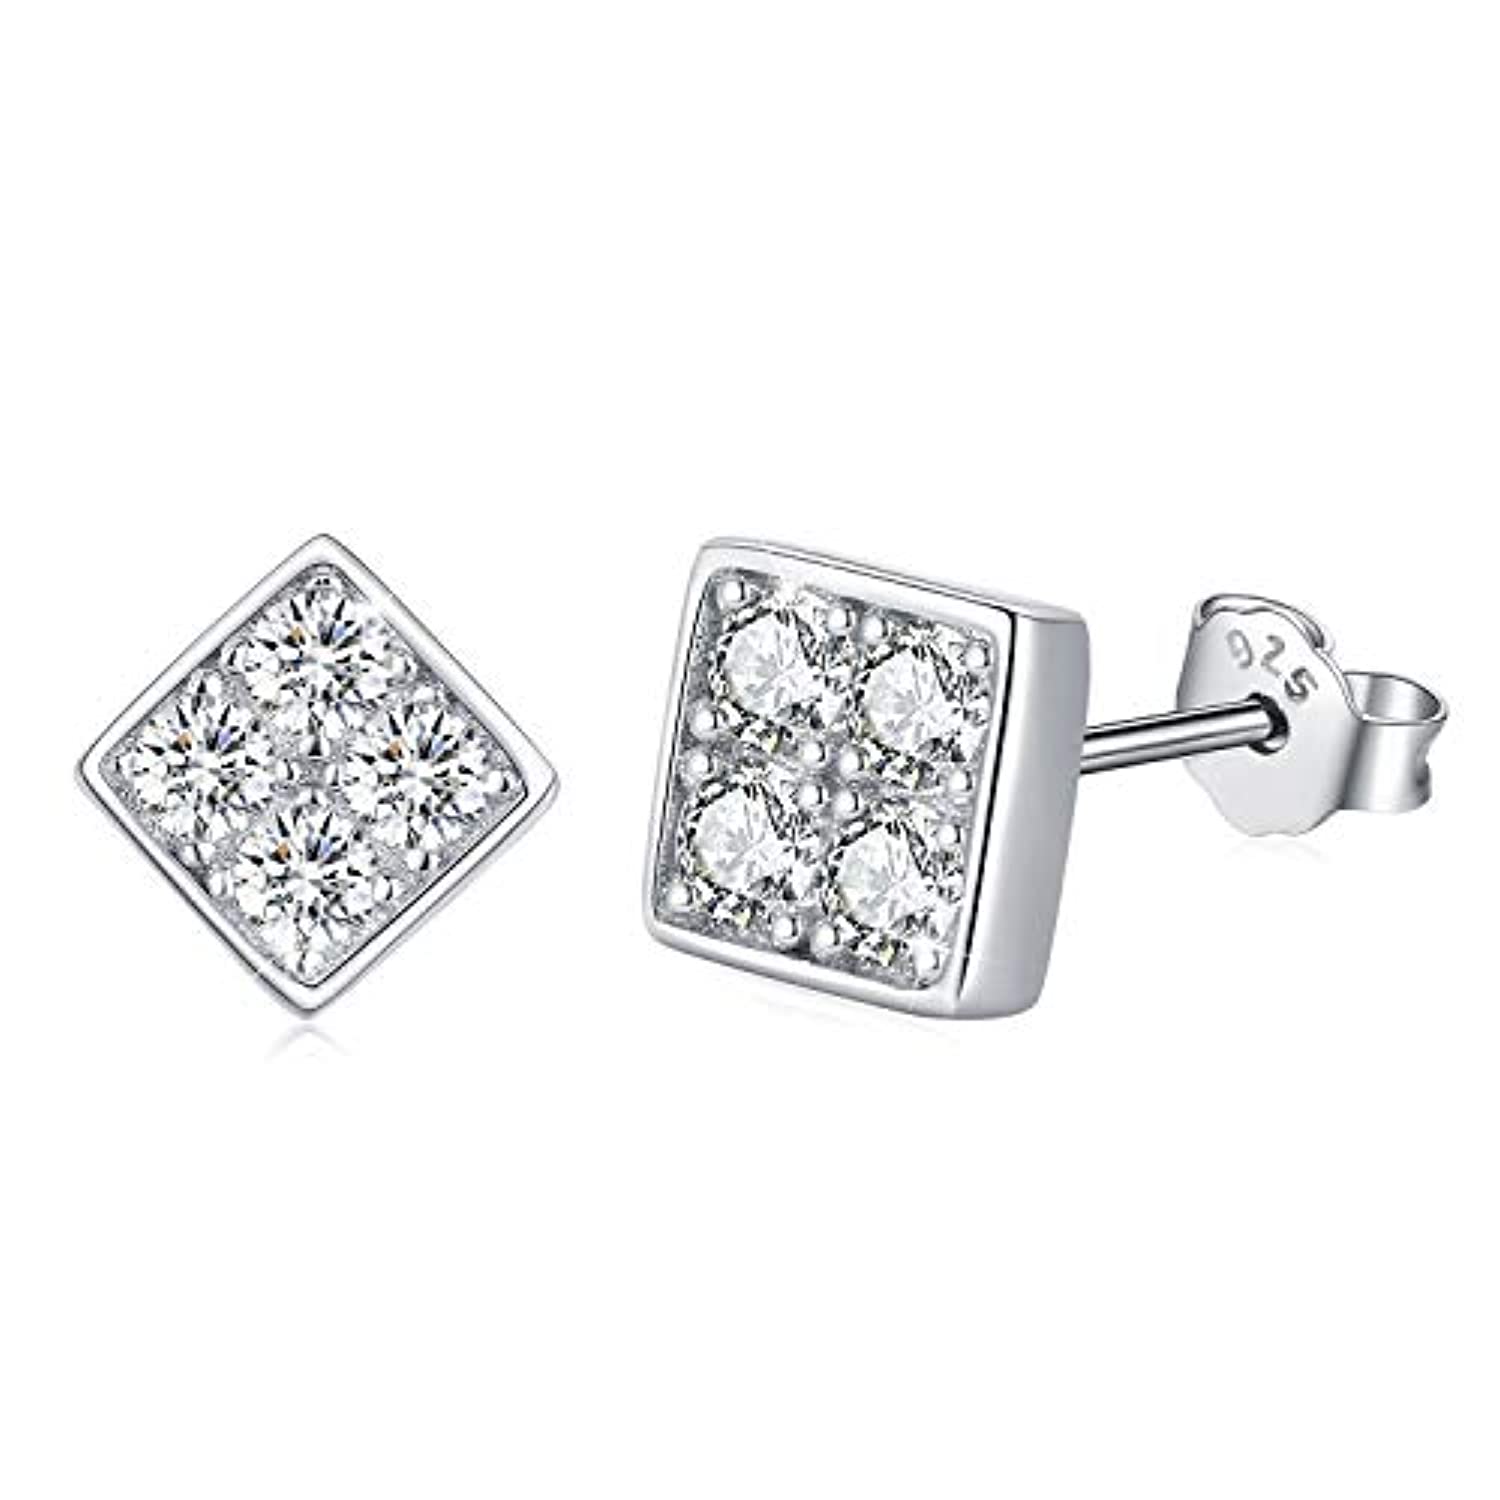 Handcrafted Sterling Silver Stud Earrings from Thailand - Silver Cubes |  NOVICA